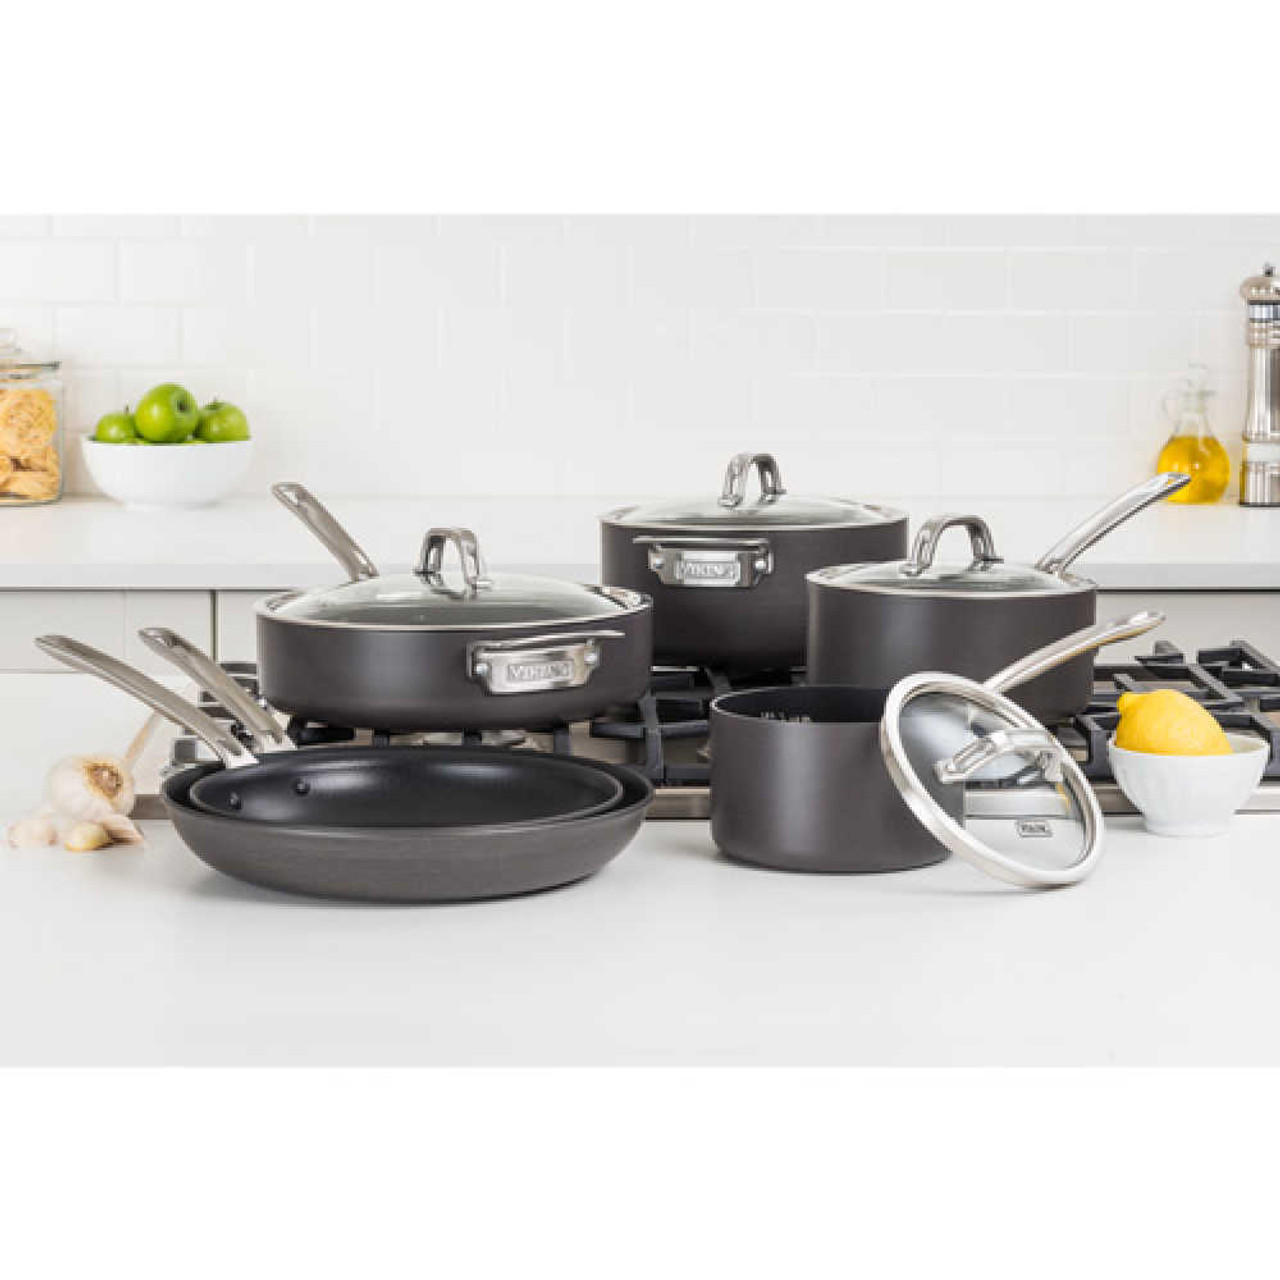 https://cdn11.bigcommerce.com/s-hccytny0od/images/stencil/1280x1280/products/4823/19660/Viking_Hard_Anodized_Nonstick_10-Piece_Cookware_Set_1__58982.1656020756.jpg?c=2?imbypass=on